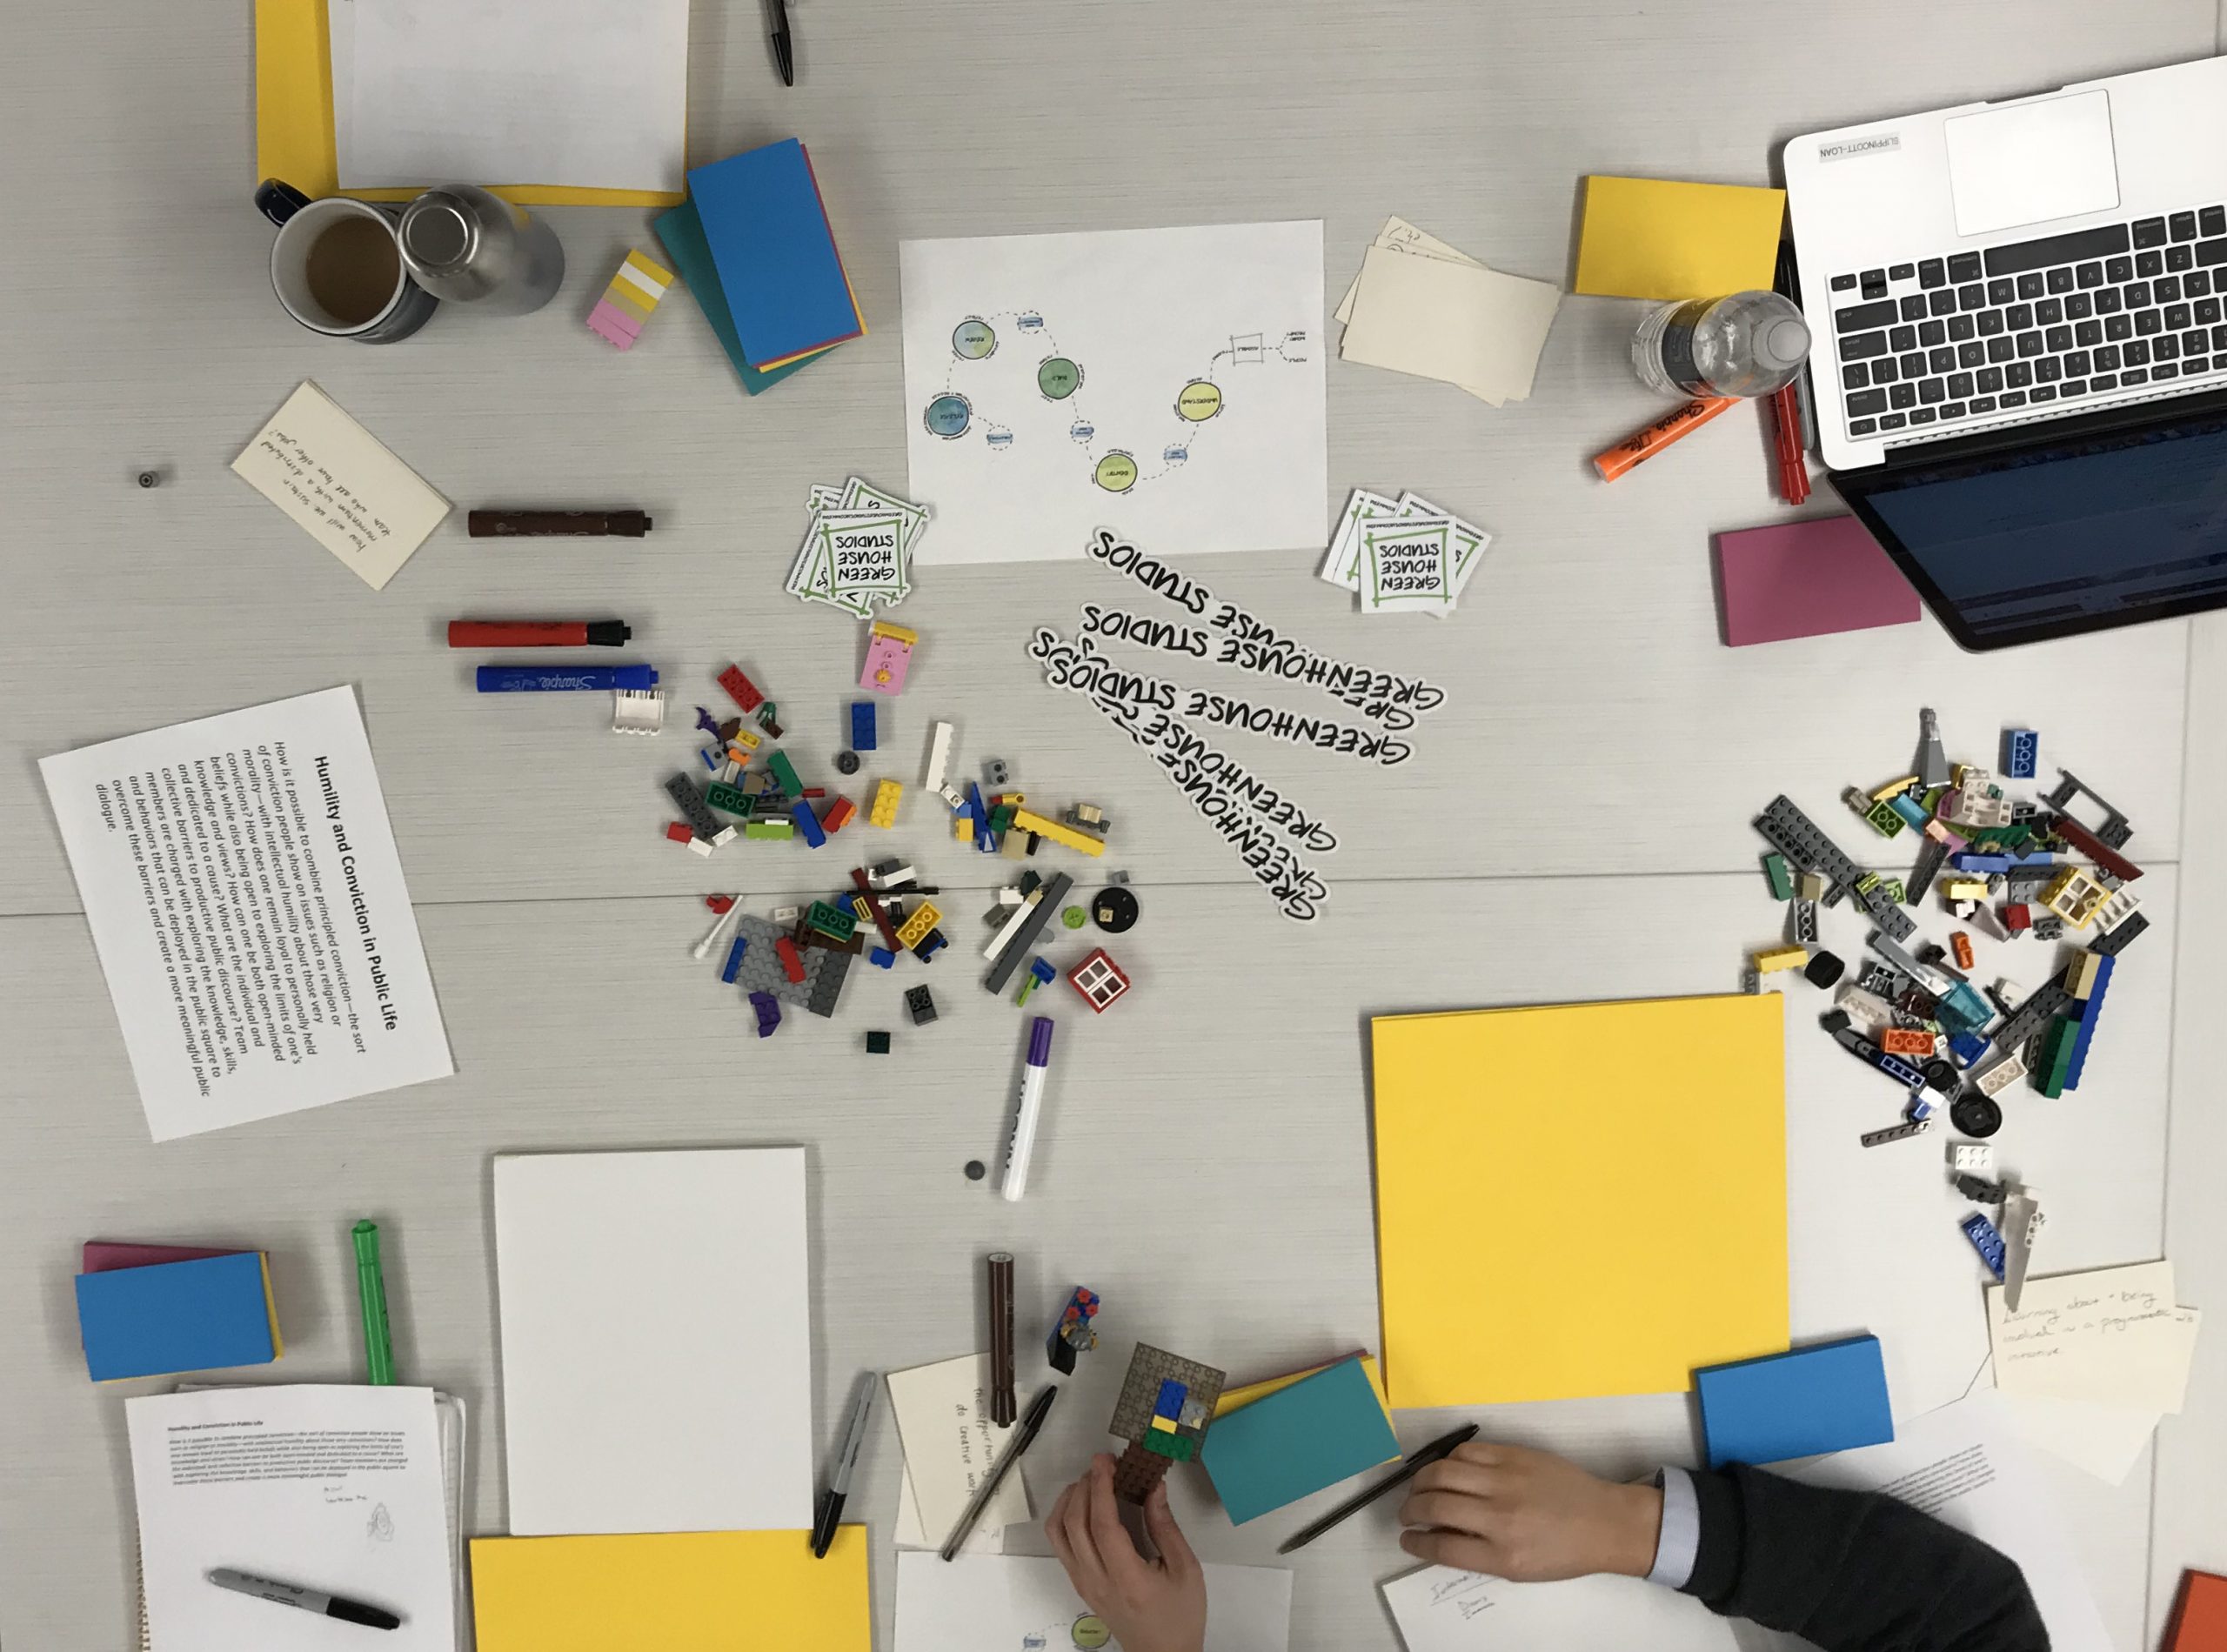 table being used for brainstorming with pens, paper, legos, and other items scattered about.